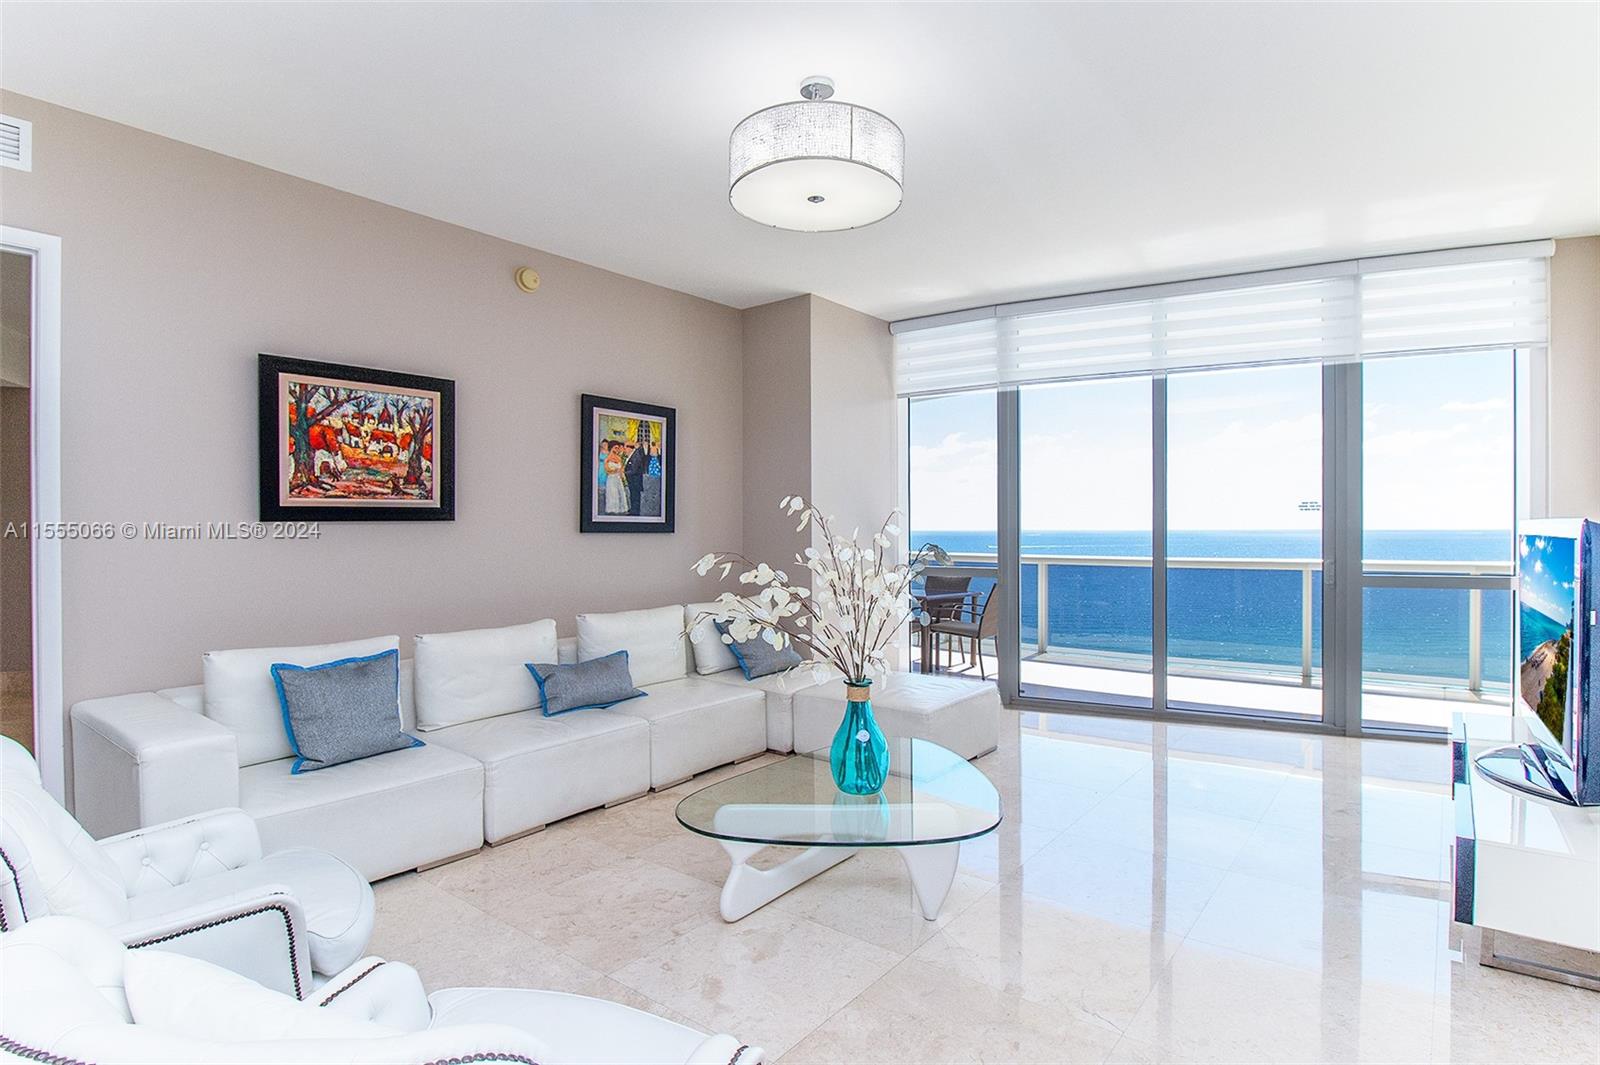 15901 Collins Ave 1607, Sunny Isles Beach, Florida 33160, 3 Bedrooms Bedrooms, ,3 BathroomsBathrooms,Residentiallease,For Rent,15901 Collins Ave 1607,A11555066